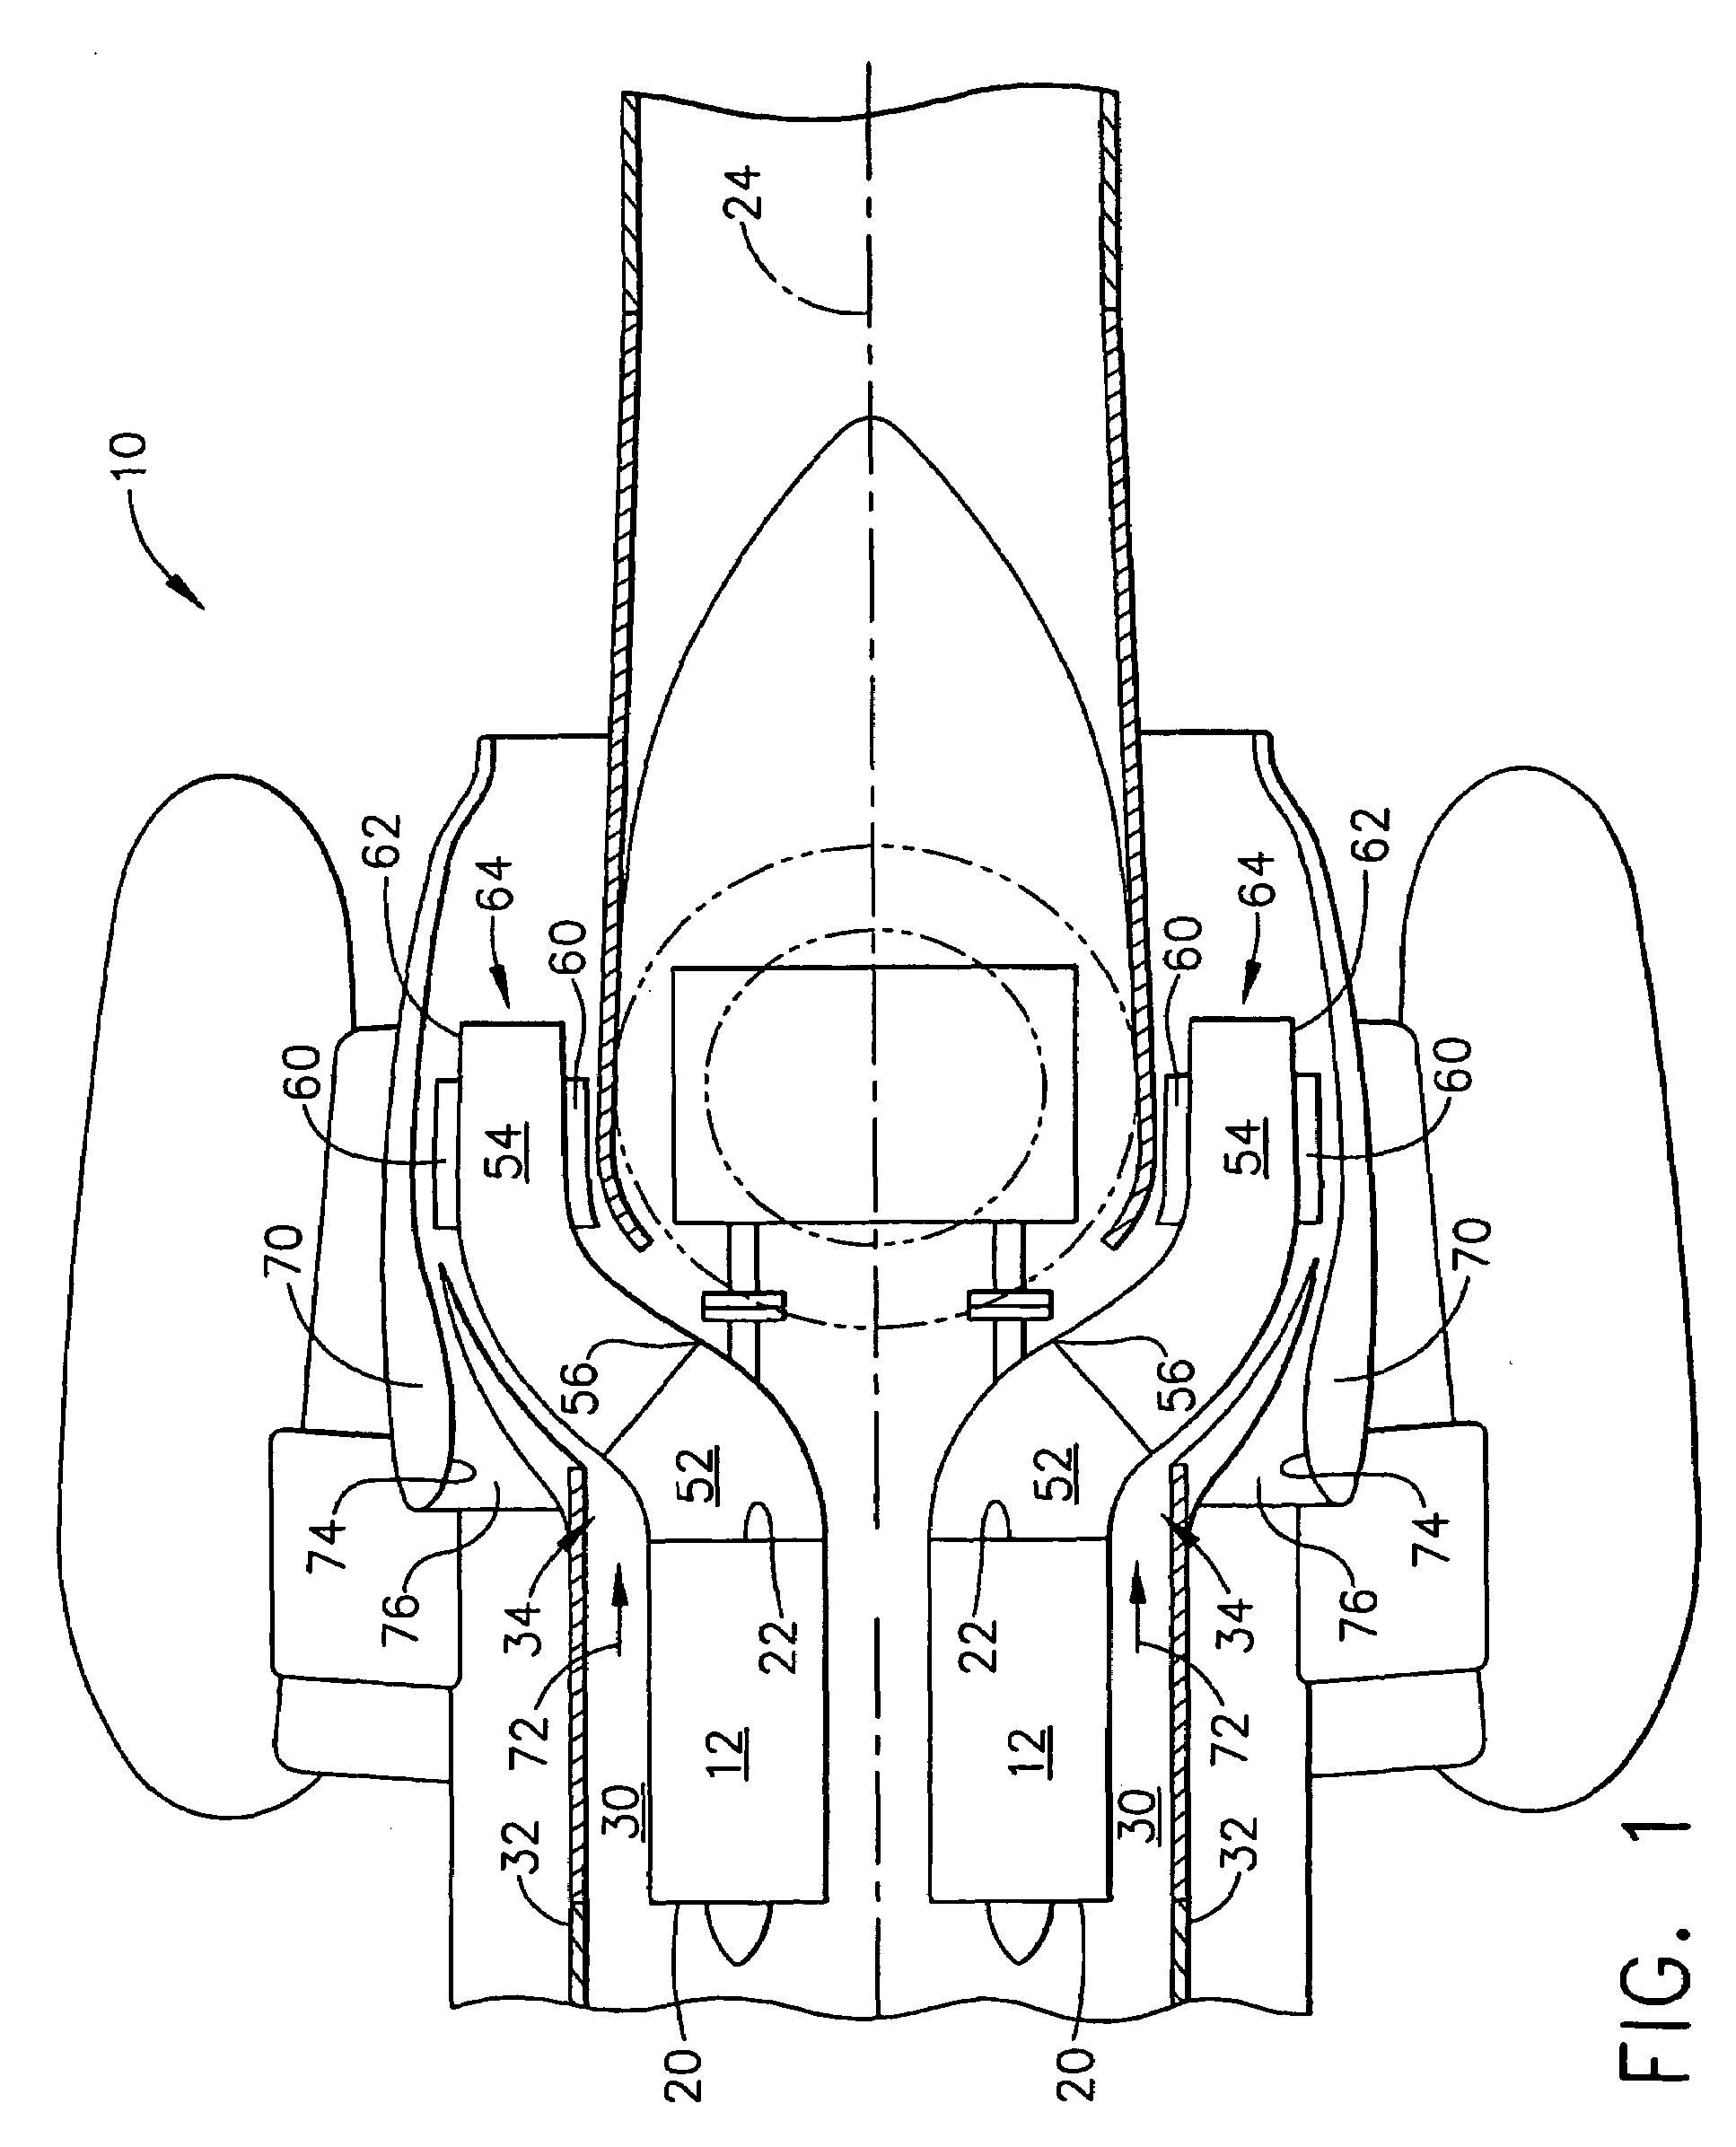 Gas turbine engine exhaust nozzle including an infrared suppression system having a plurality of U-shaped blocking fins and method of assembling said exhaut nozzle